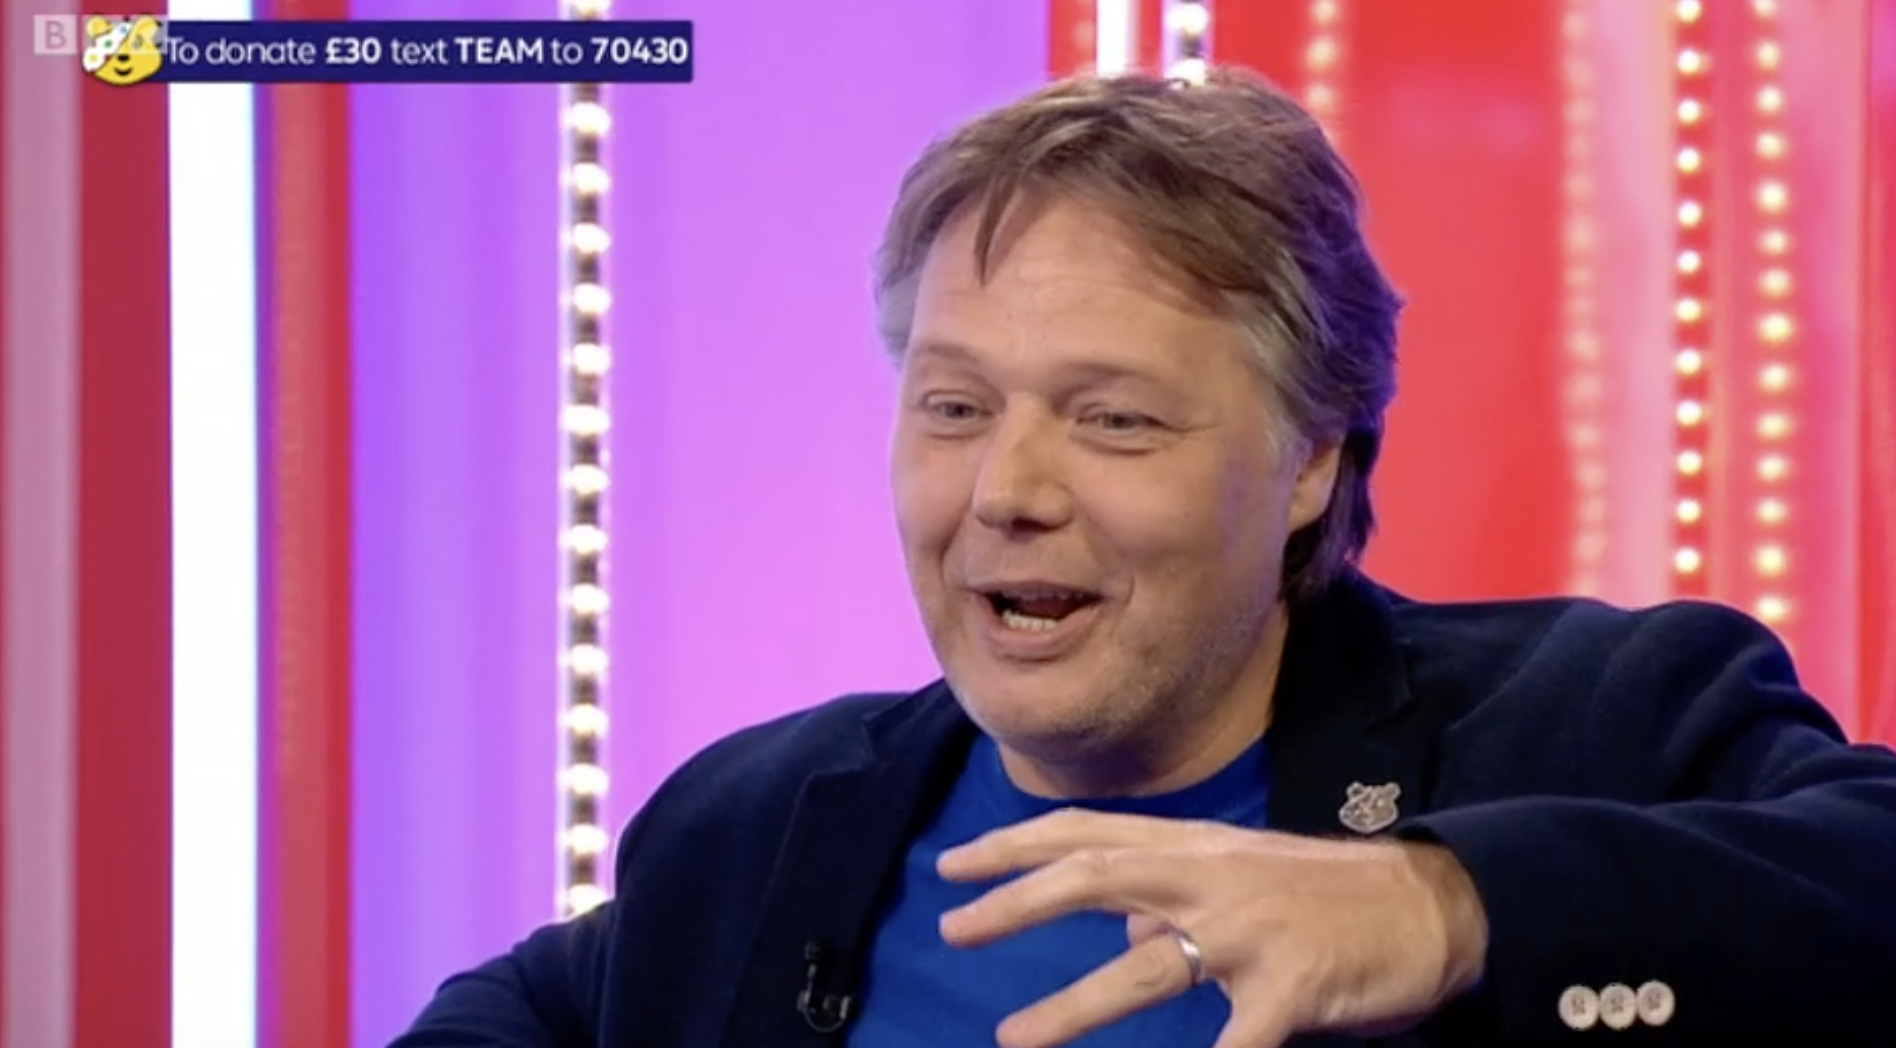 Are Shaun Dooley and Stacey Dooley related? The actor leads the way with Children in Need album